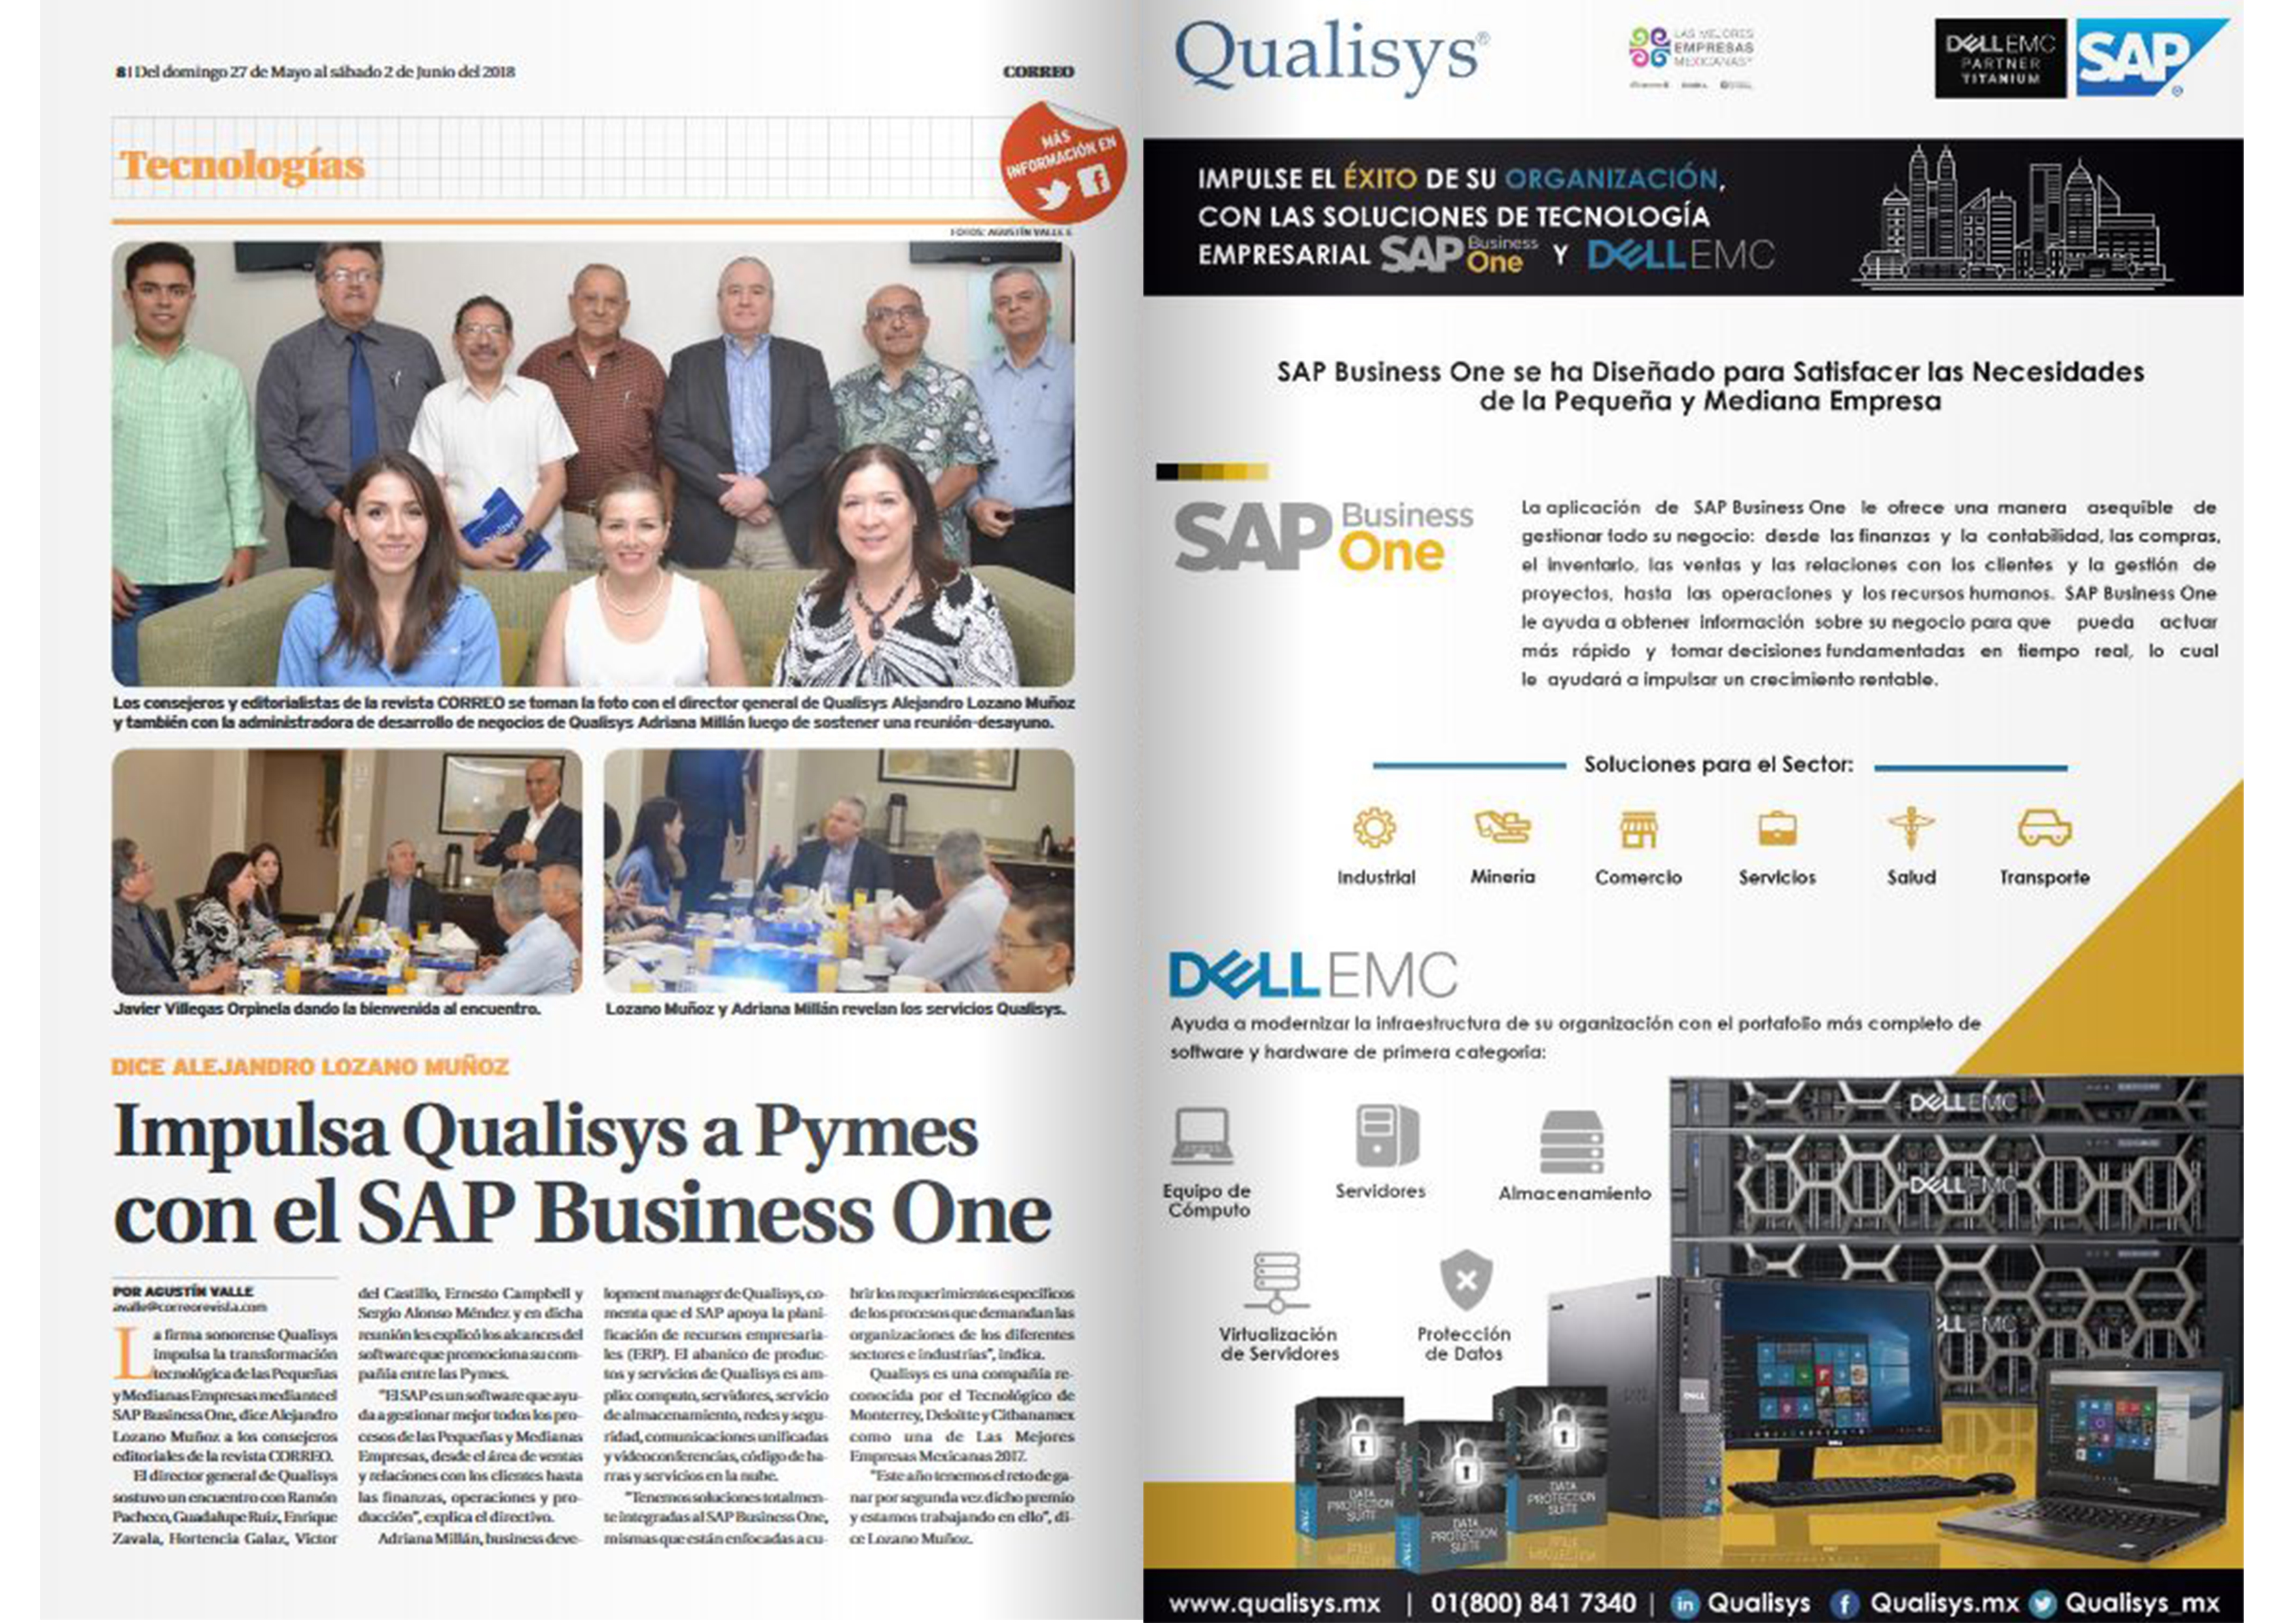 Impulsa Qualisys a Pymes con SAP Business One  - Image